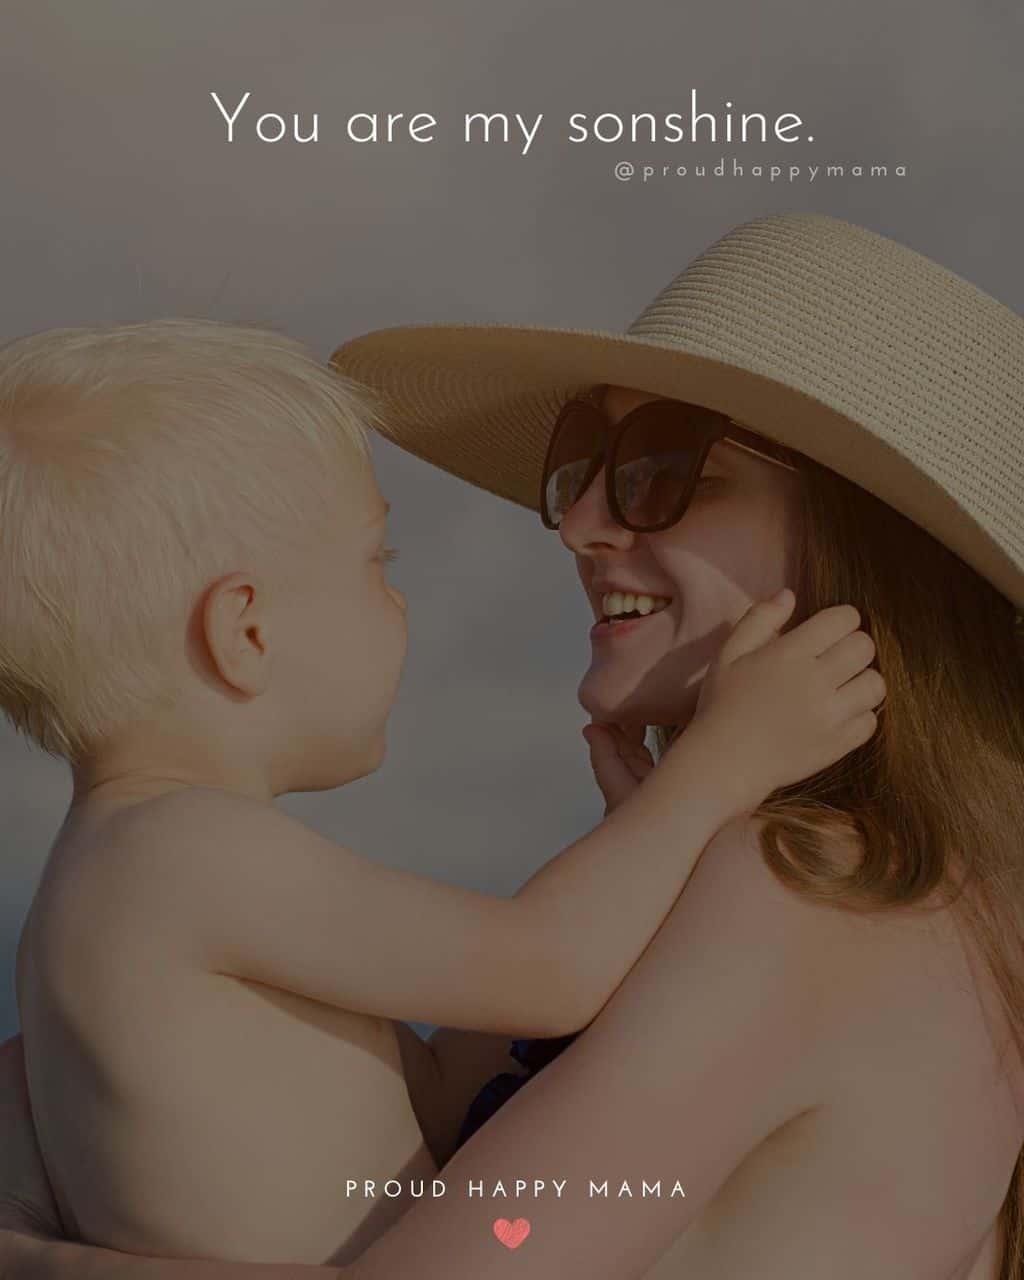 Son Quotes - You are my sonshine.’